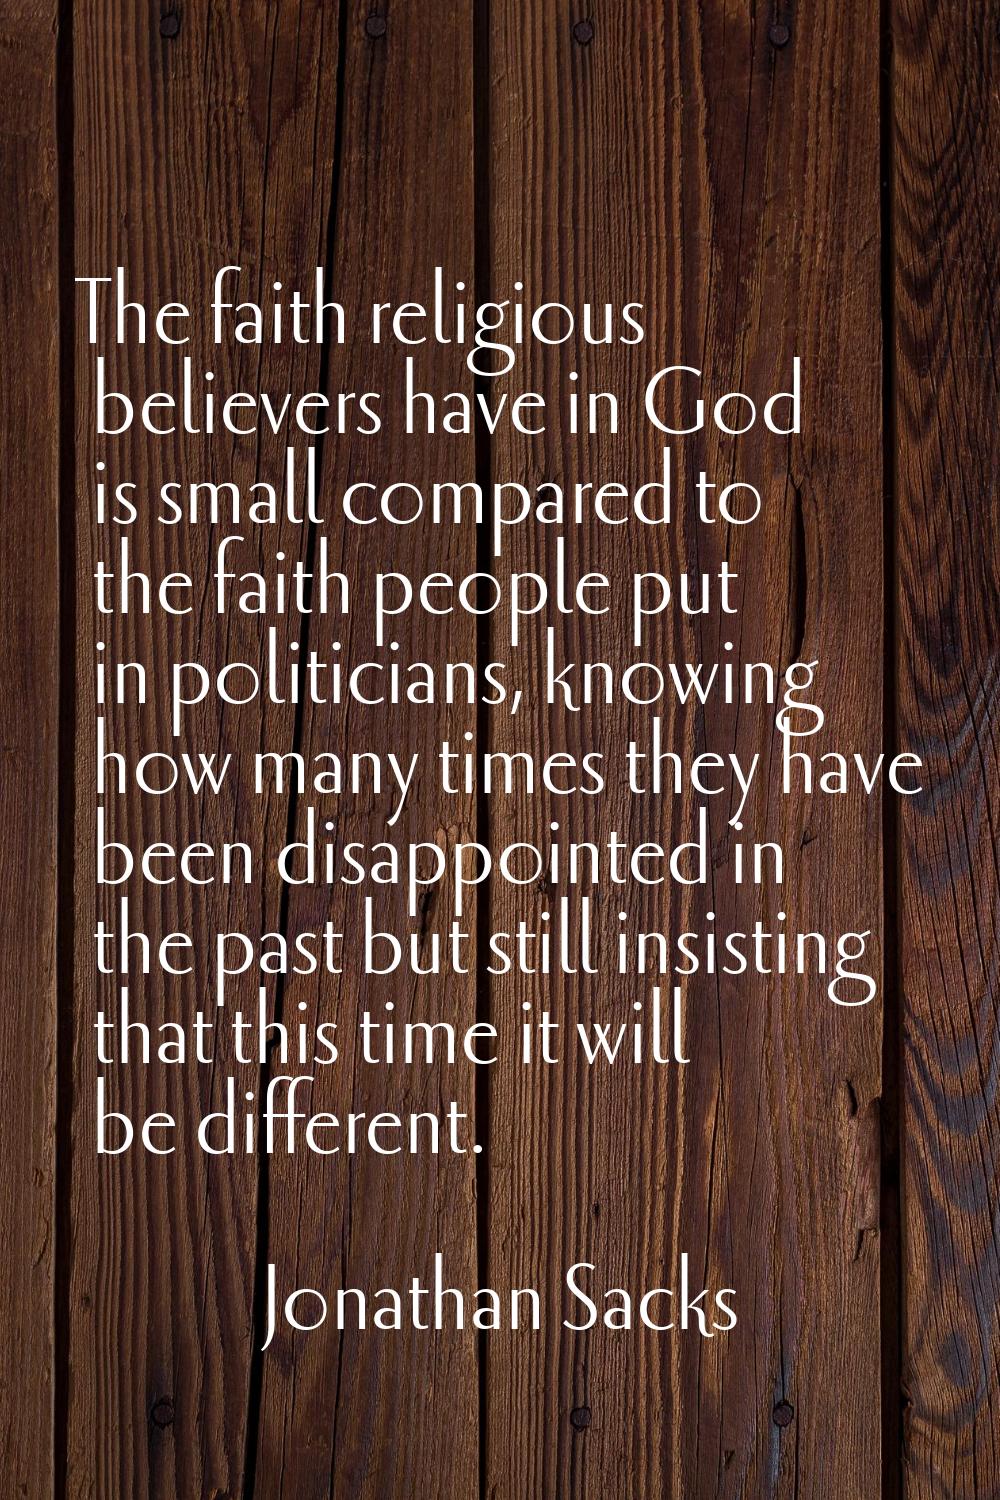 The faith religious believers have in God is small compared to the faith people put in politicians,